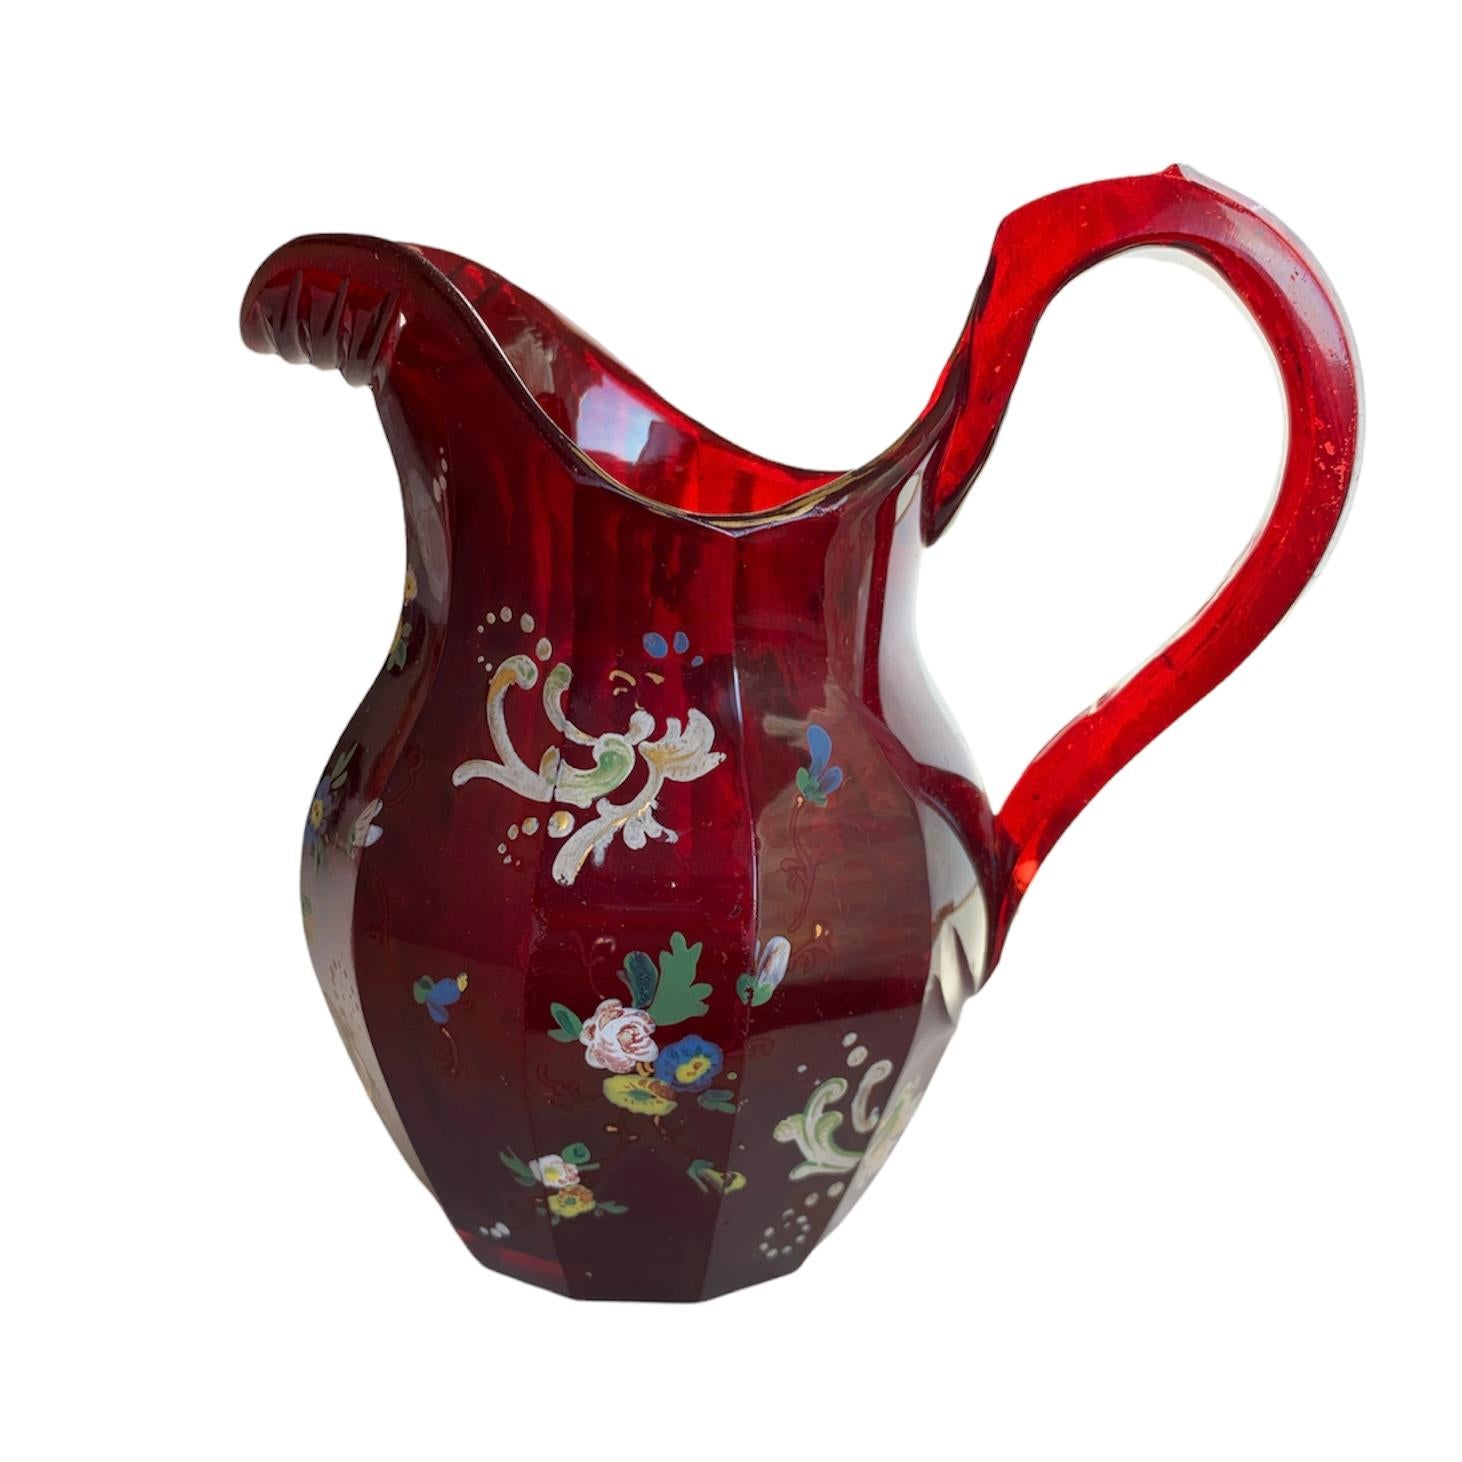 A beautifully shaped pitcher made of high quality ruby red glass with hand-painted enamel decoration, the 12 sided body features colorfull enameling with scrollworks and flowers, Bohemia, 19th century.